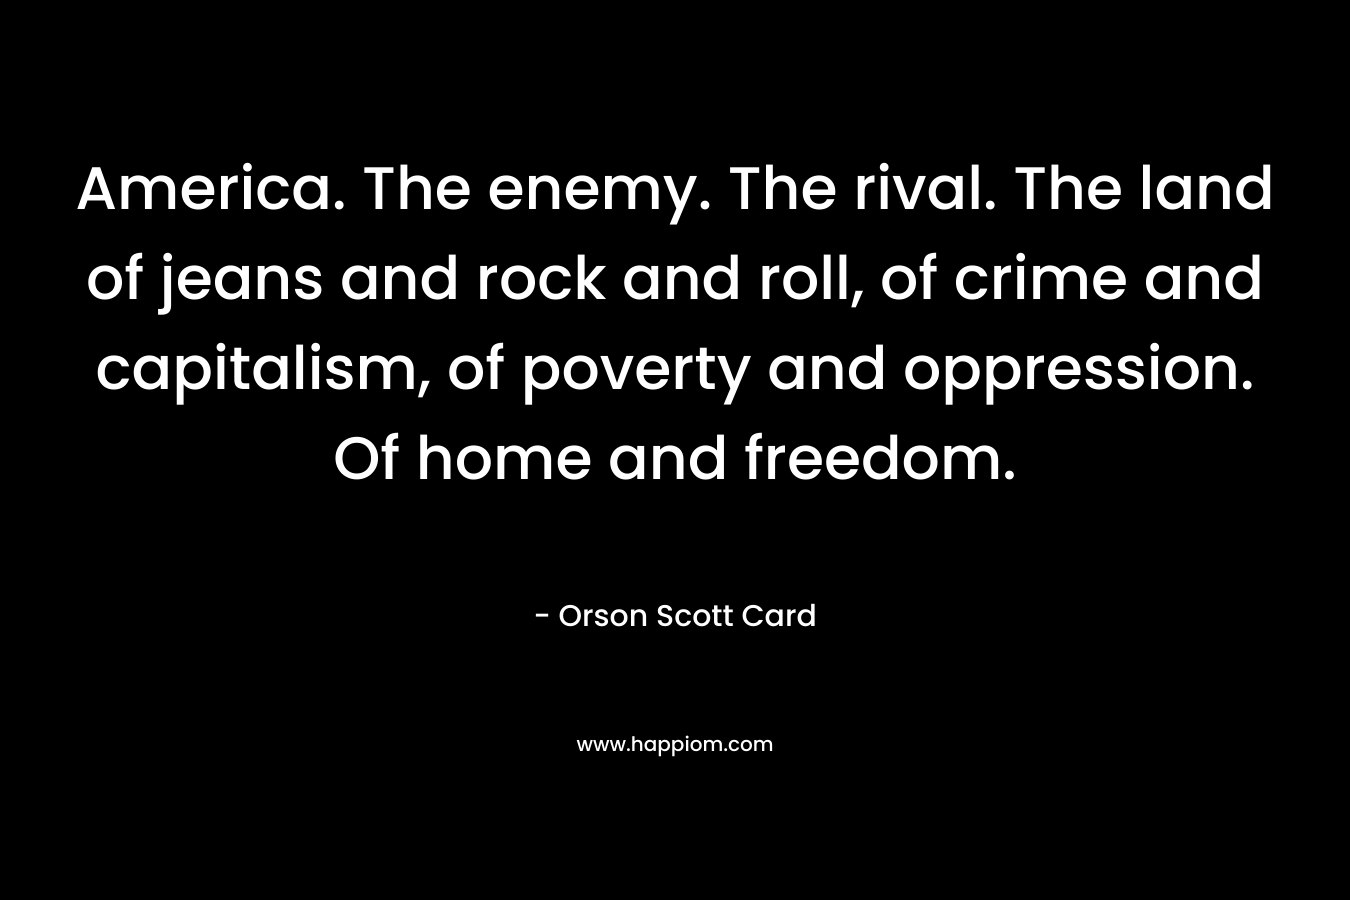 America. The enemy. The rival. The land of jeans and rock and roll, of crime and capitalism, of poverty and oppression. Of home and freedom. – Orson Scott Card